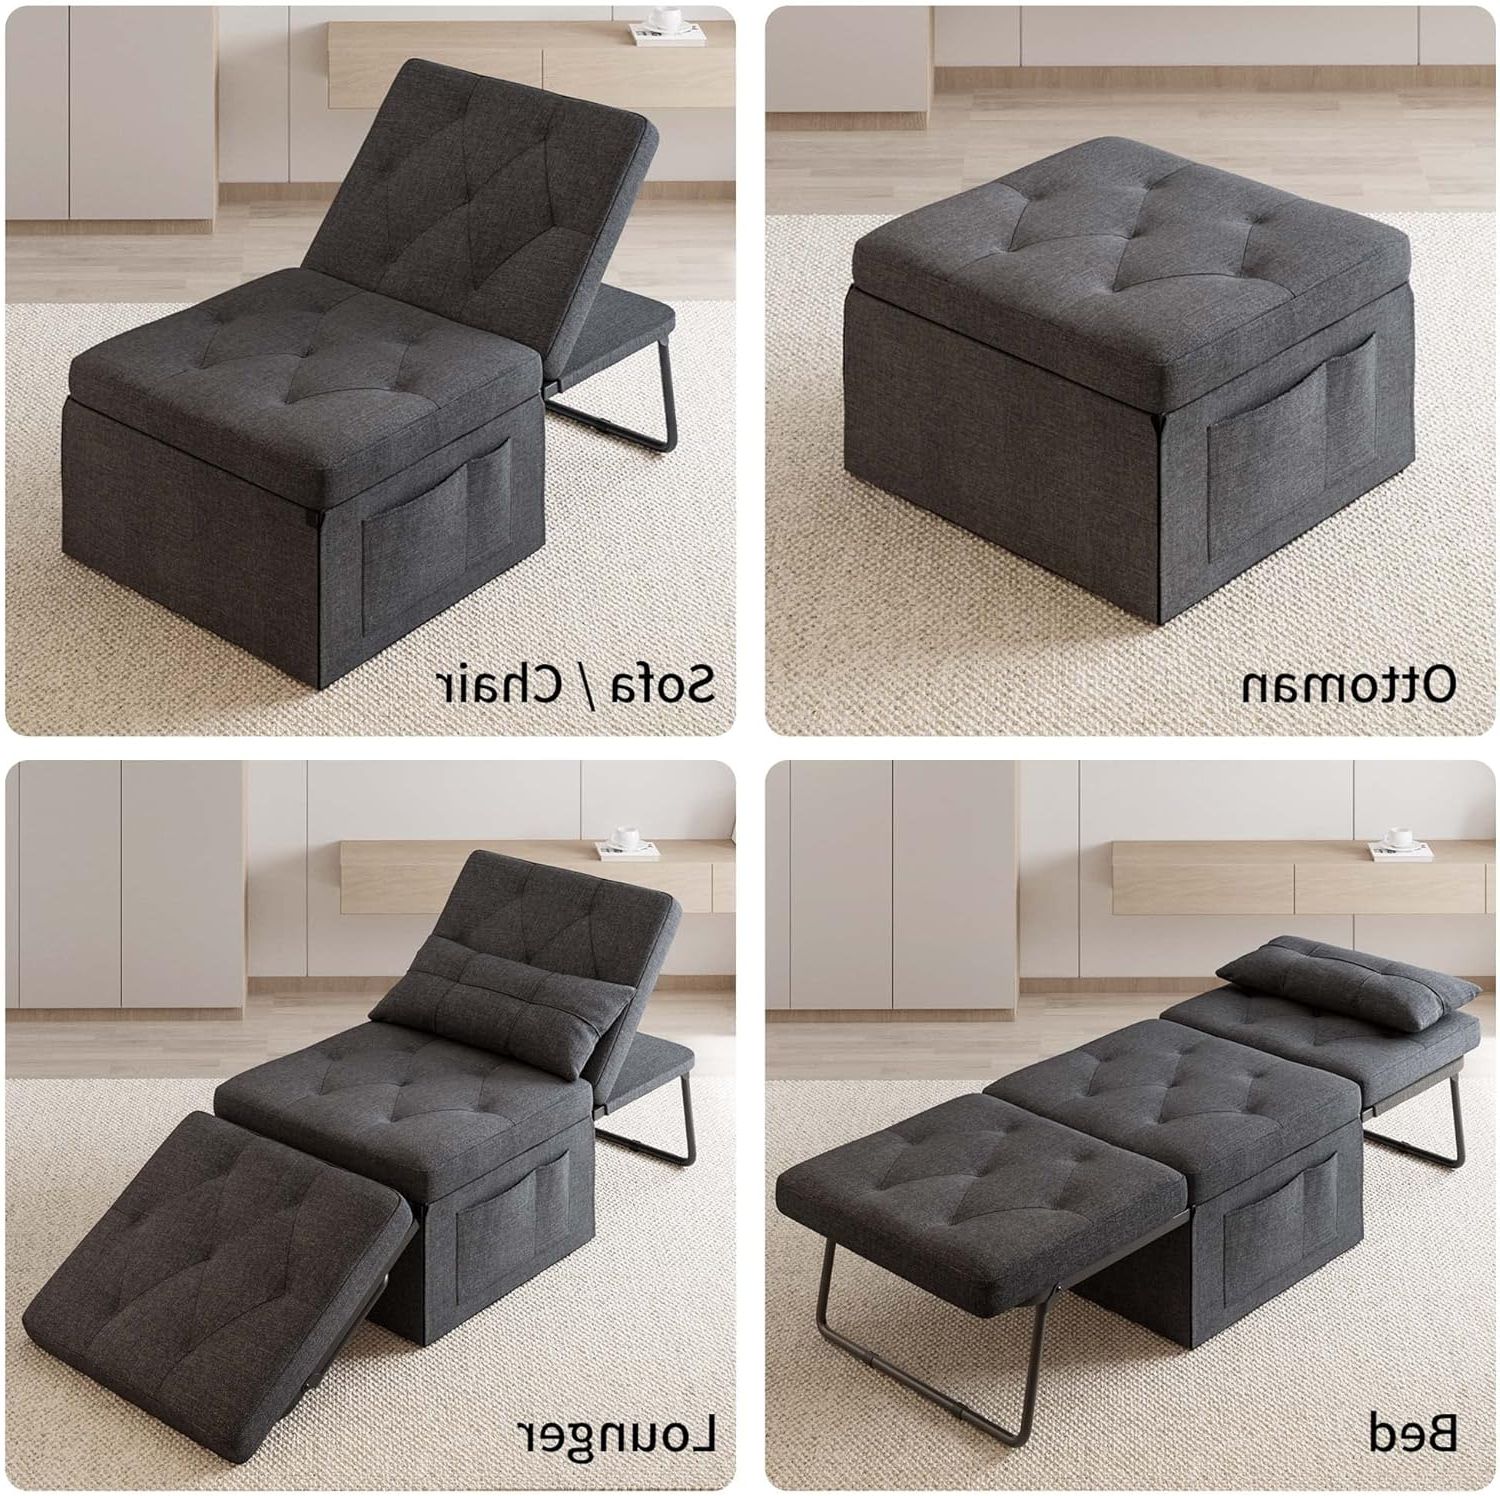 4 In 1 Convertible Sleeper Chair Beds Regarding Latest Buy Aiho Sofa Bed, 4 In 1 Sleeper Chair Bed Convertible Chair Guest Bed (View 11 of 15)